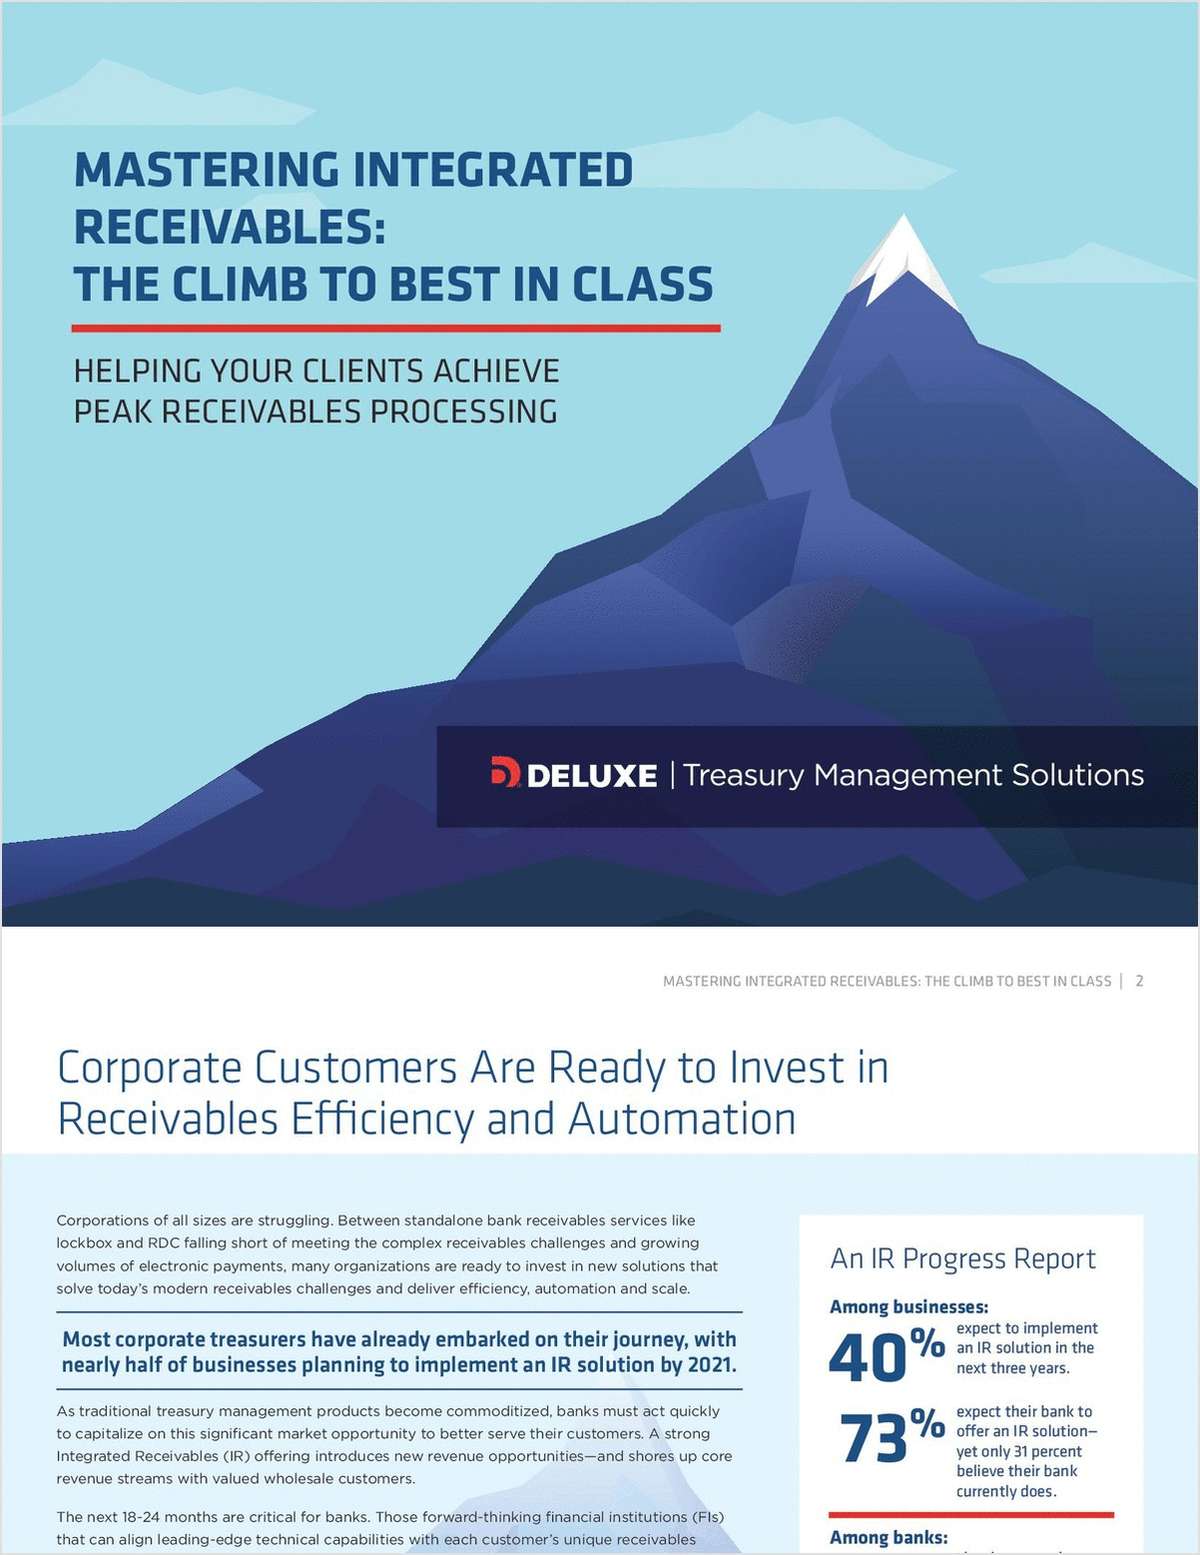 Mastering Integrated Receivables: The Climb to Best in Class